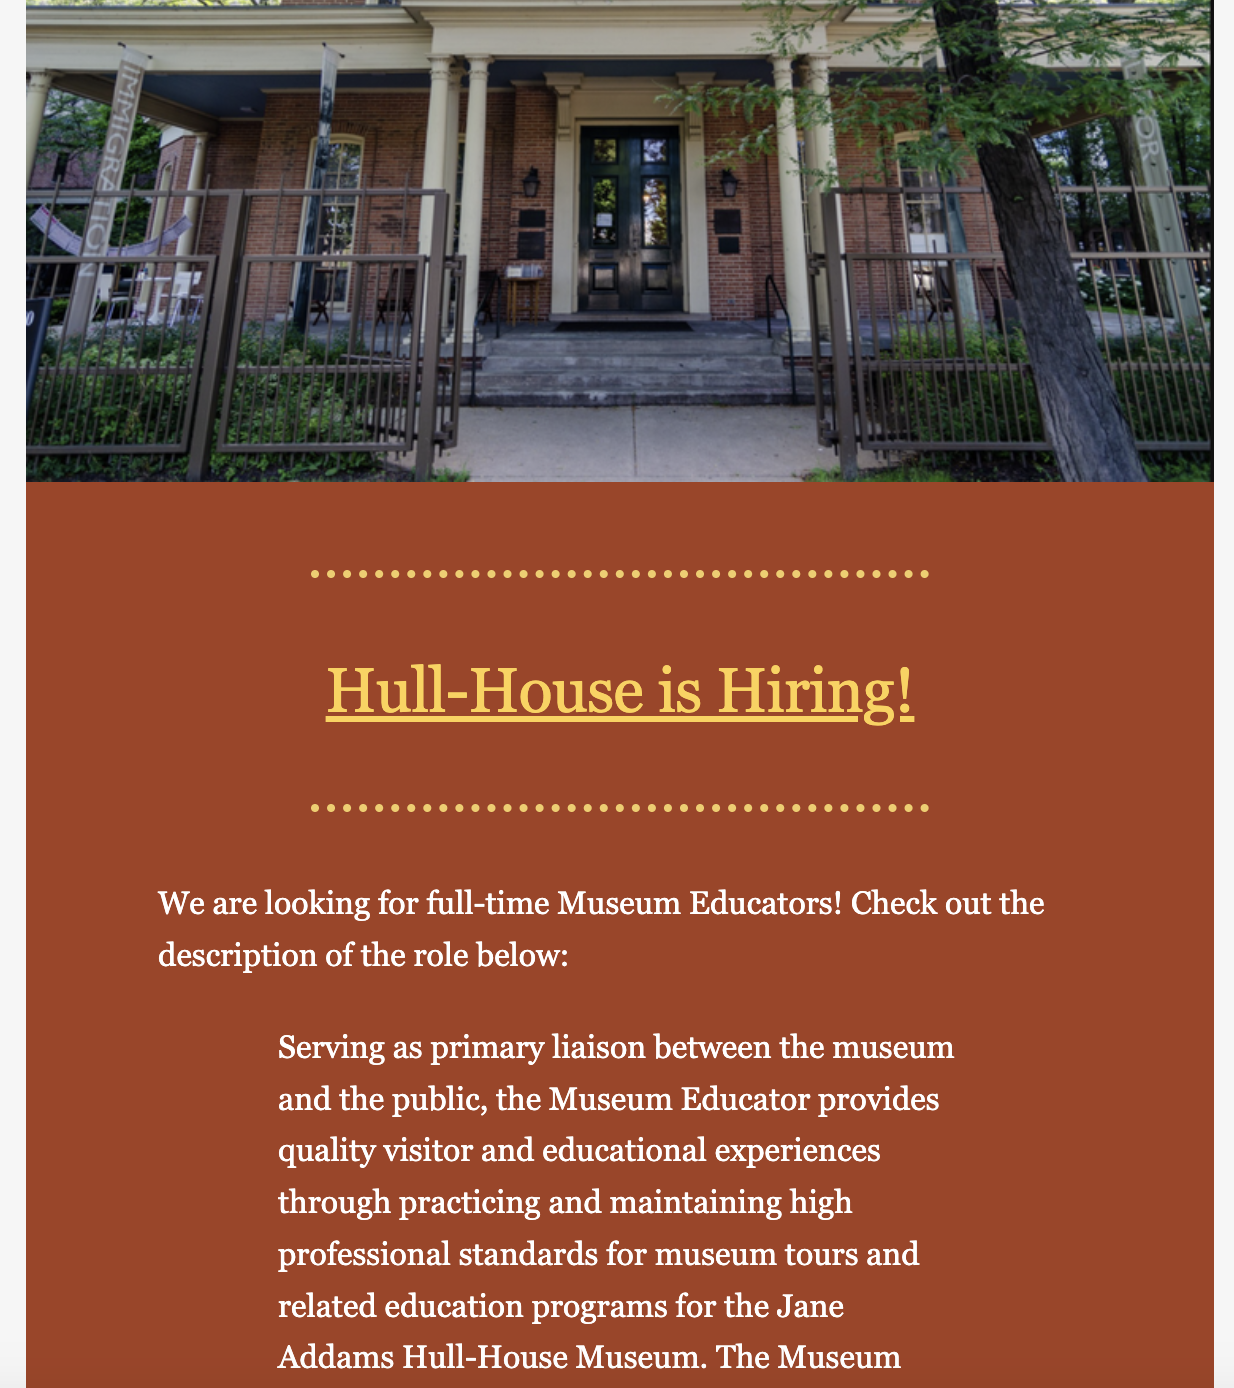  Hull-House is growing! New educator and an associate director positions were announced.  